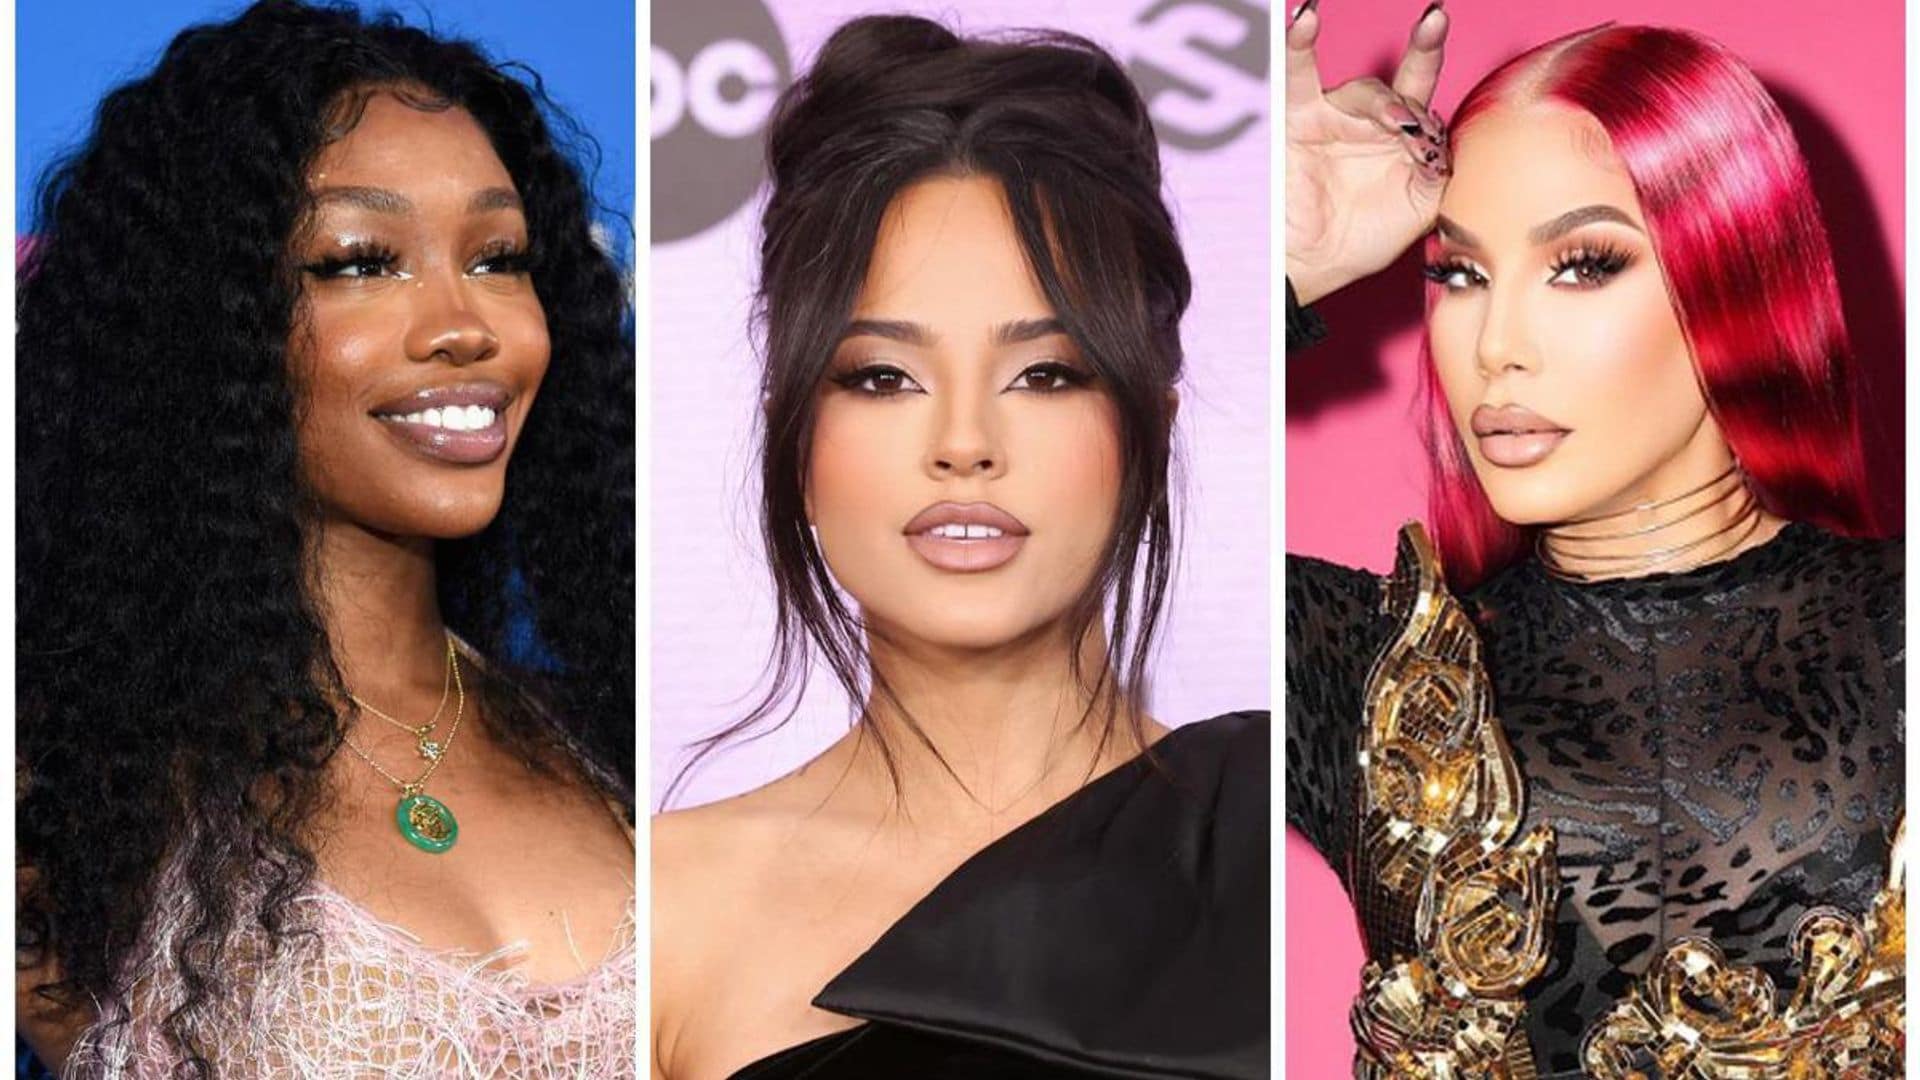 SZA, Becky G, and Ivy Queen will be honored at the 2023 Billboard Women in Music Awards